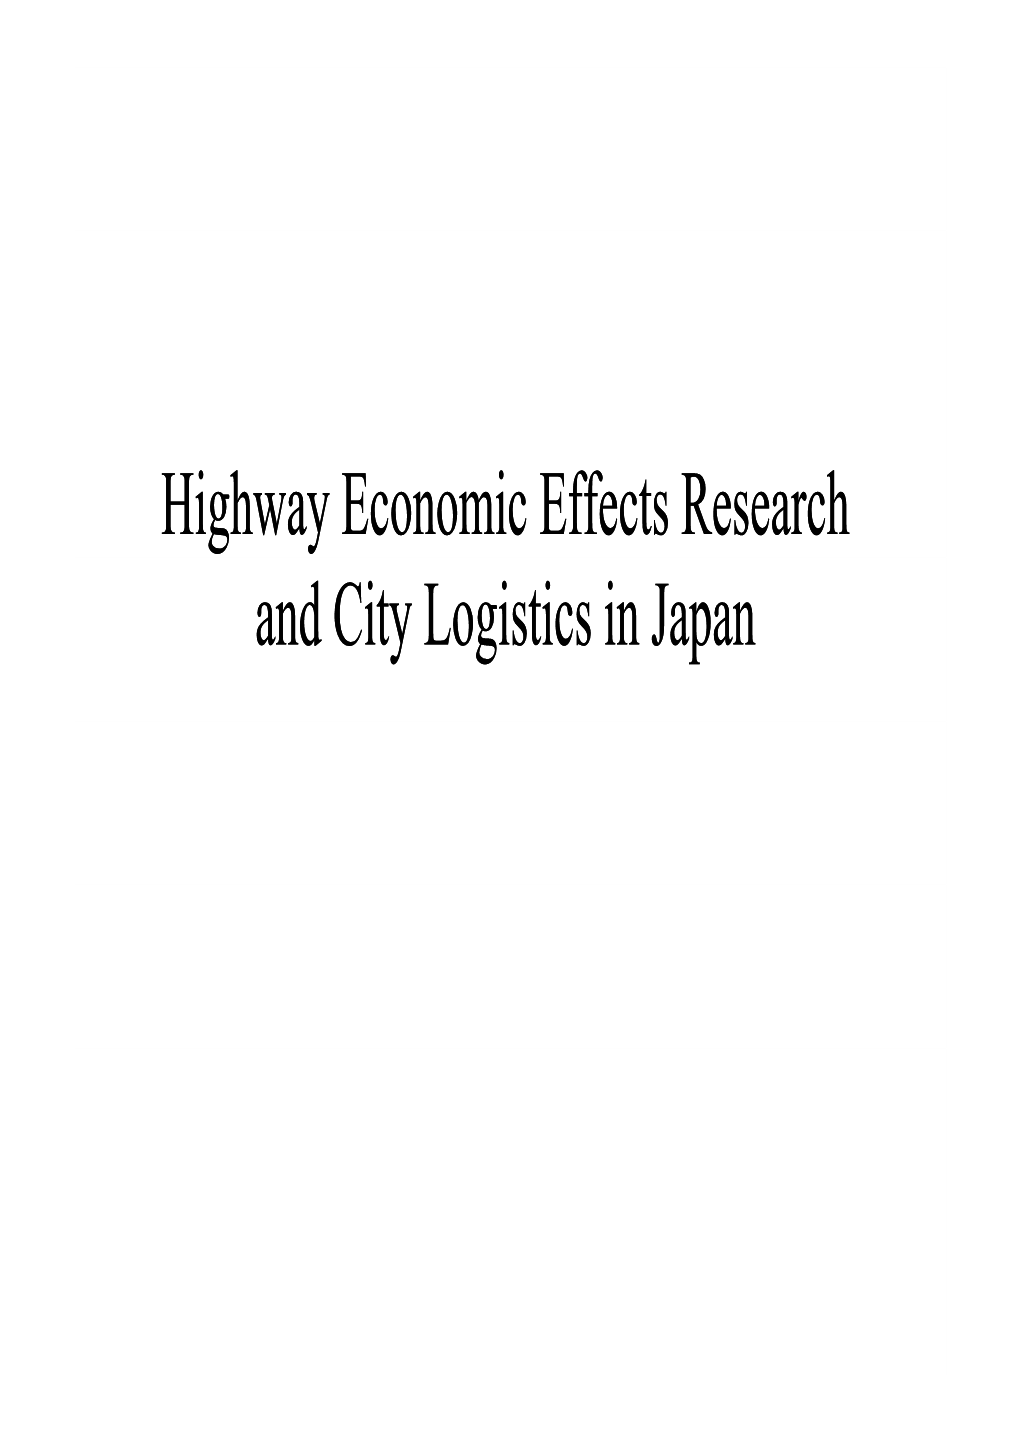 Highway Economic Effects Research and City Logistics in Japan Table of Contents I